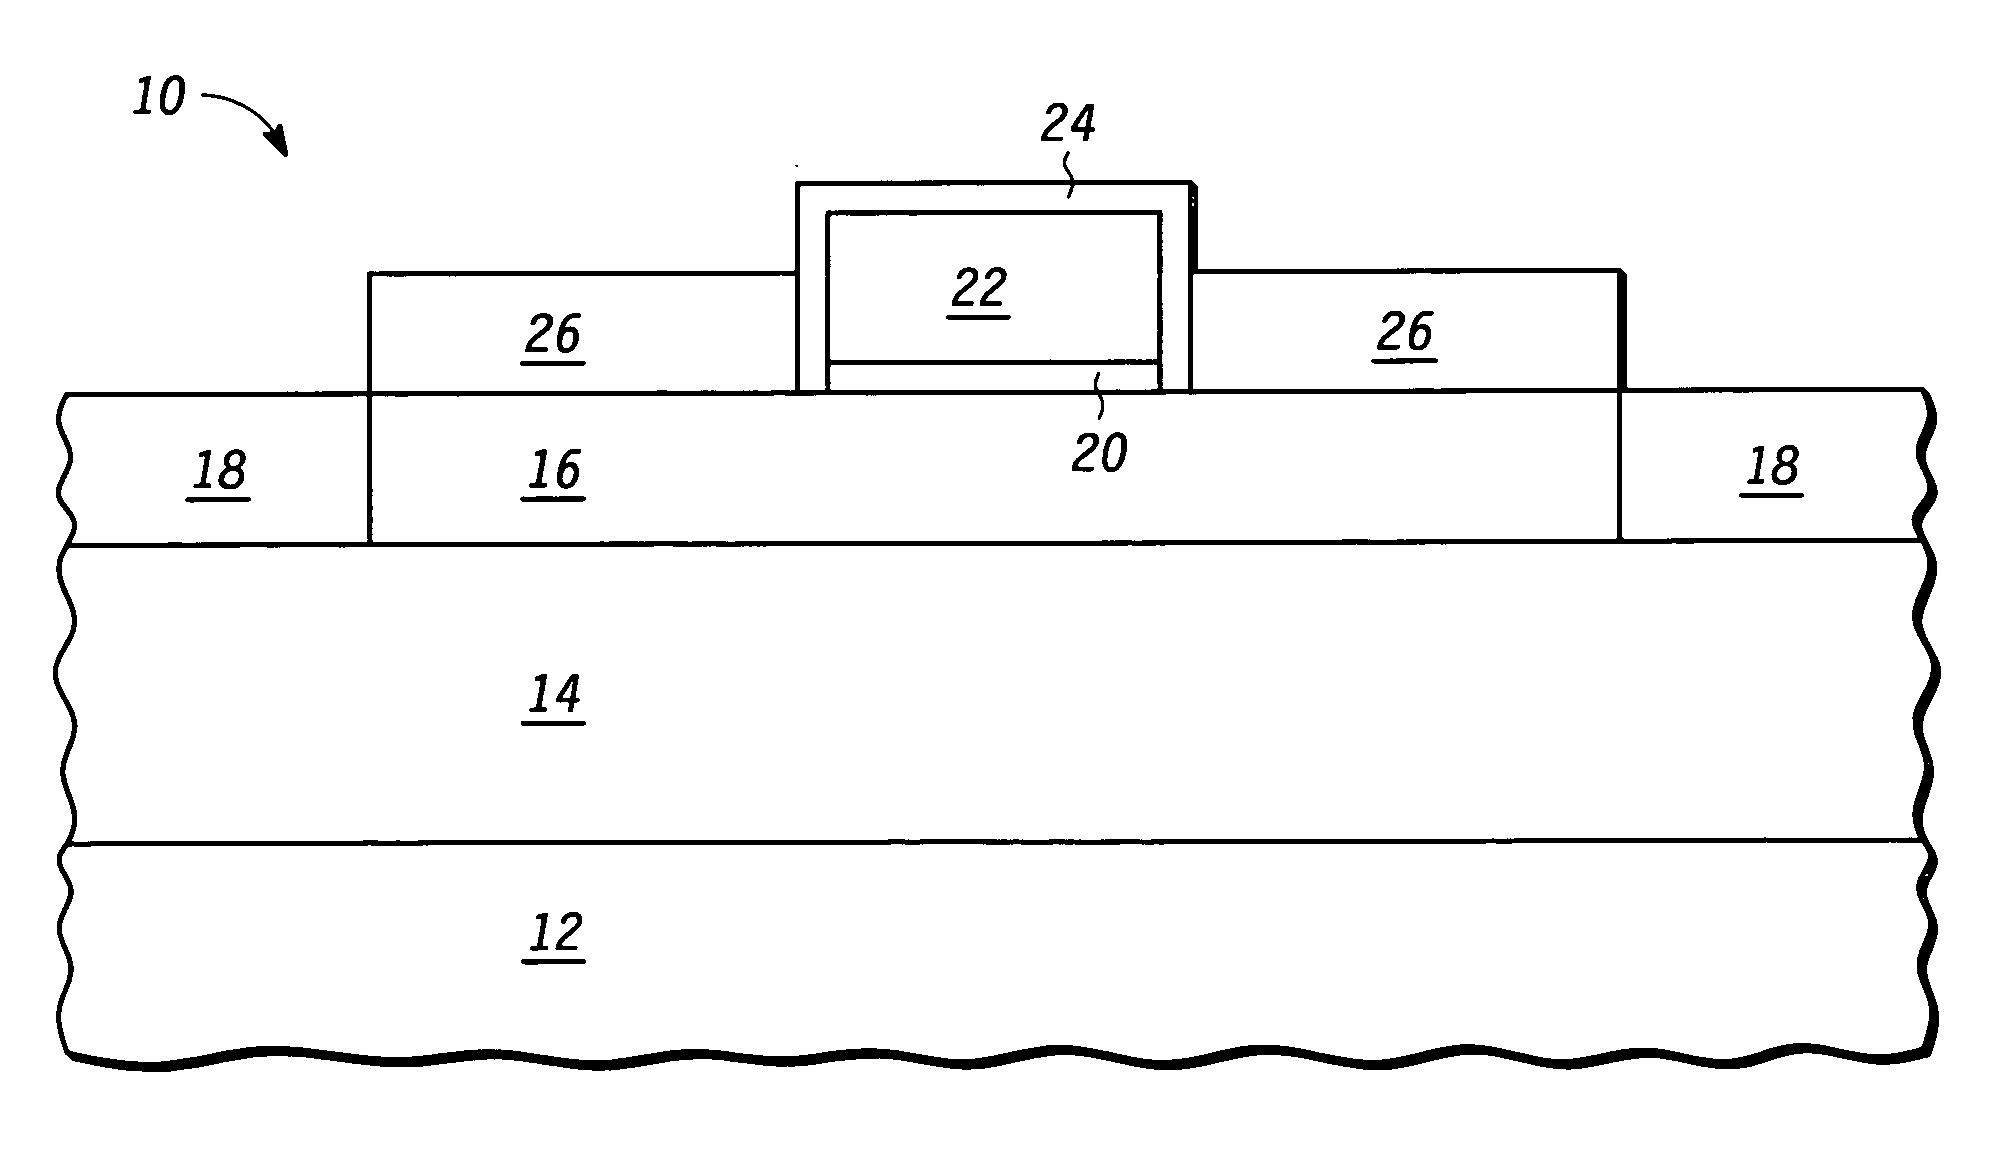 Method for forming a semiconductor device having a strained channel and a heterojunction source/drain